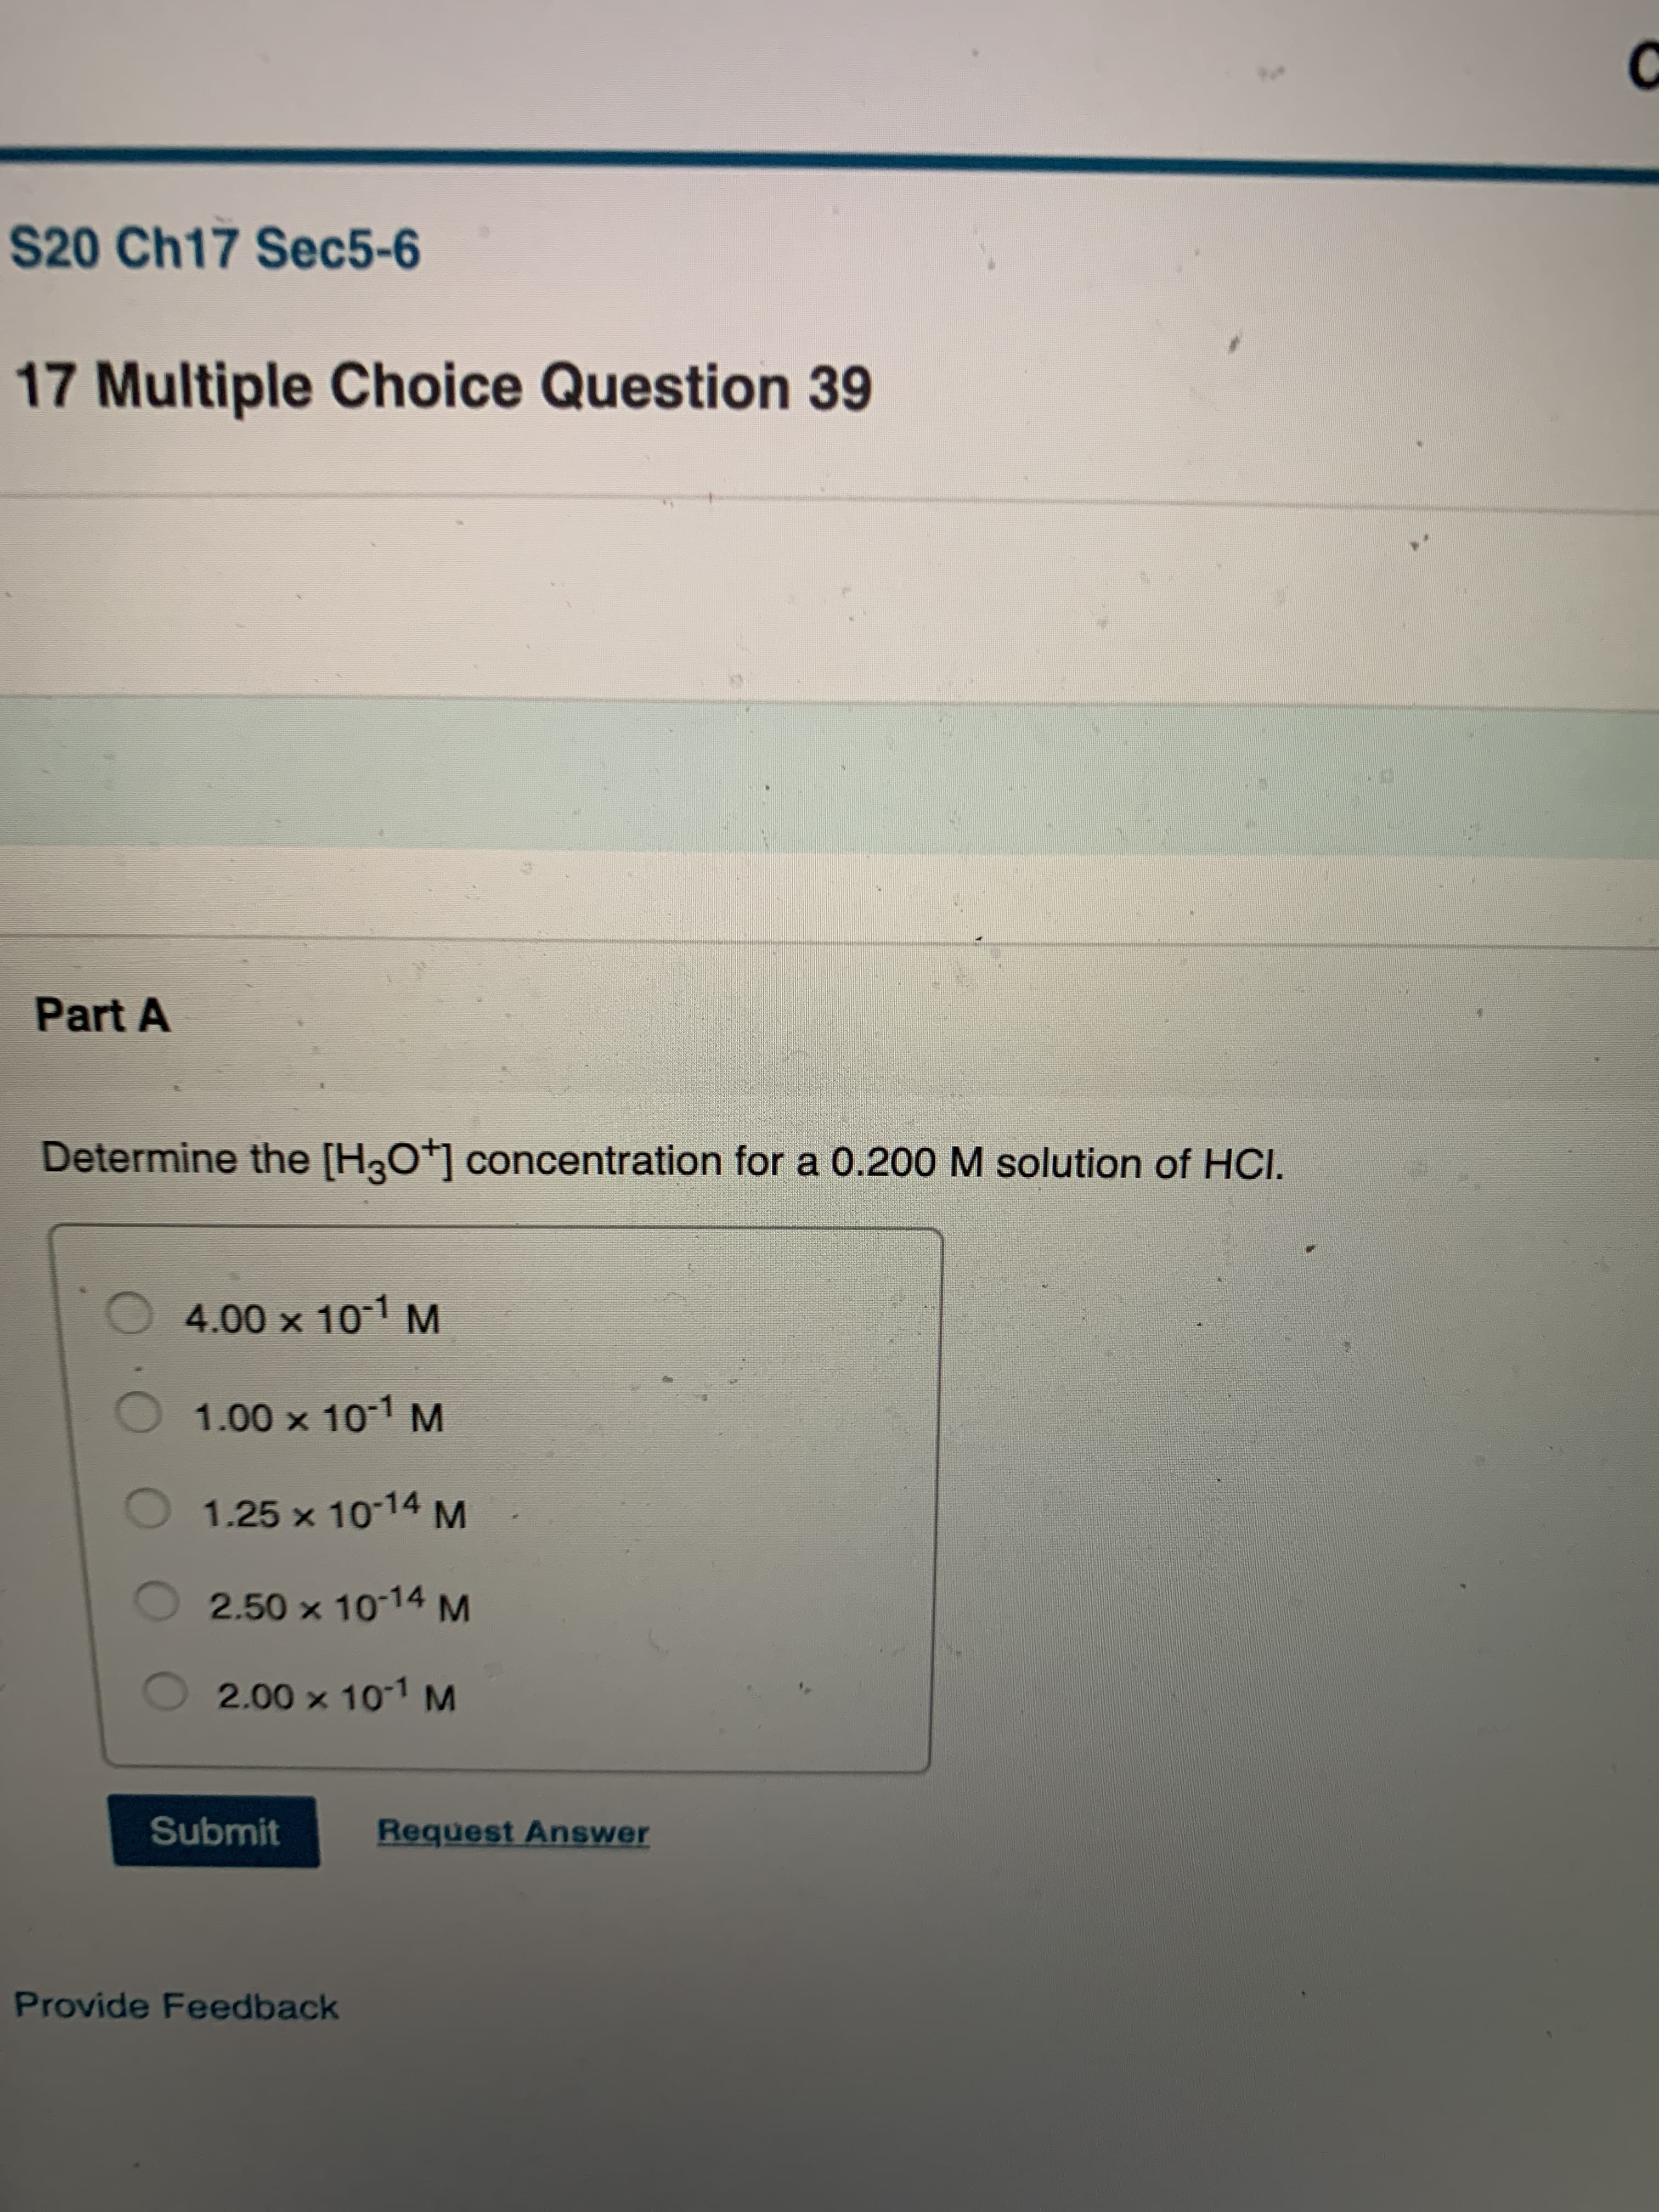 S20 Ch17 Sec5-6
17 Multiple Choice Question 39
Part A
Determine the [H3O+] concentration for a 0.200 M solution of HCI.
4.00 x 10-1 M
1.00 x 10-1 M
1.25 x 1014 M
2.50 x 10-14 M
2.00 x 101 M
Submit
Request Answer
Provide Feedback
